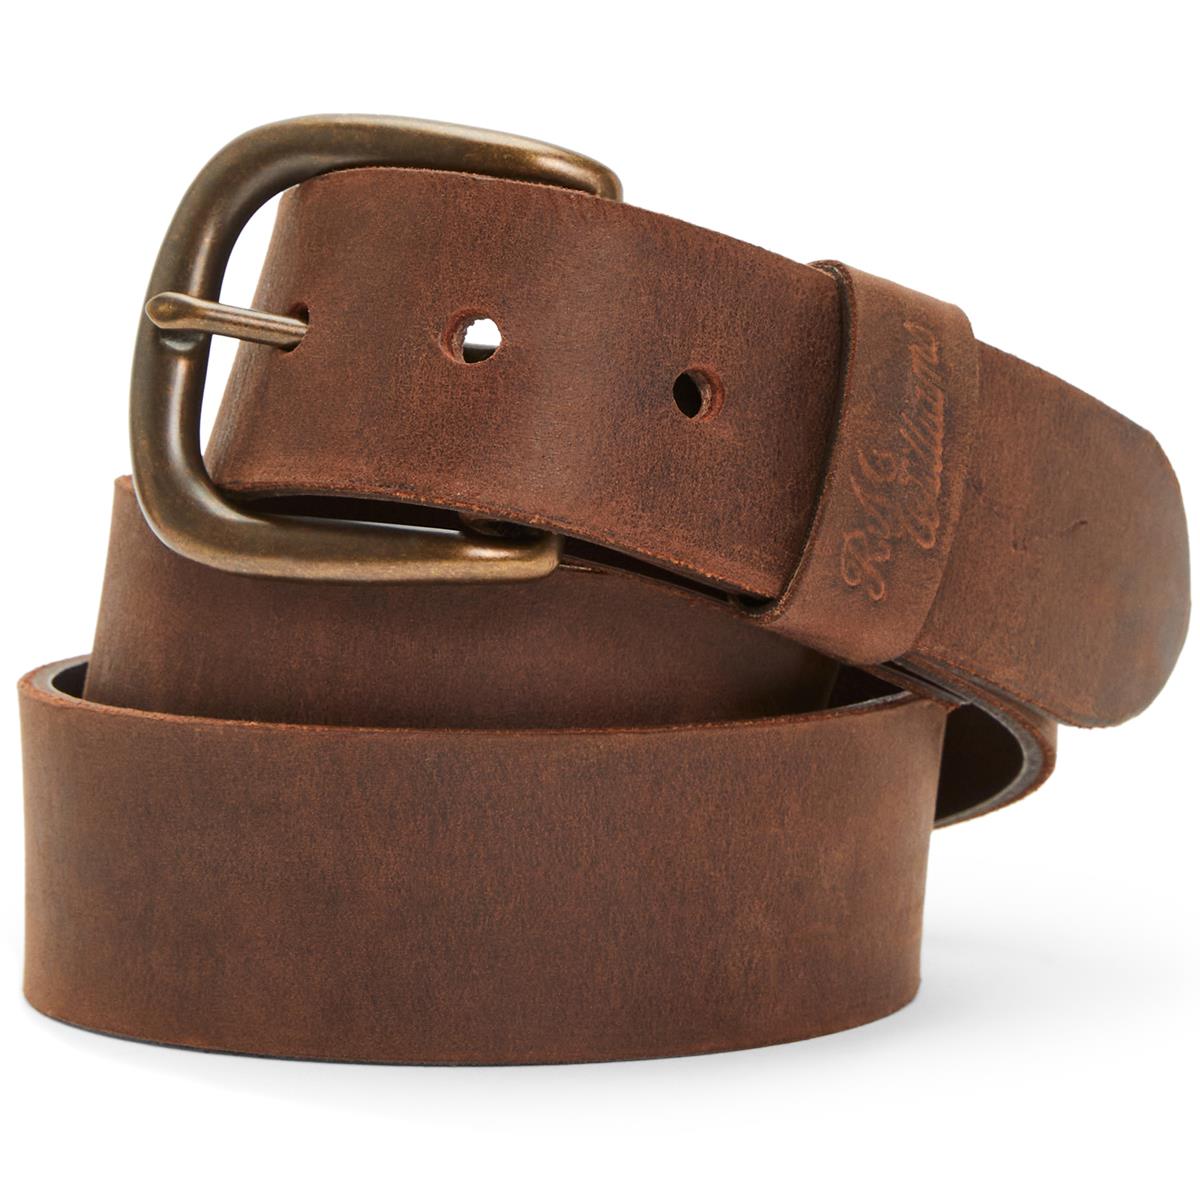 Which colour brown boots does the R.M. Williams Mens Goodwood Belt match?